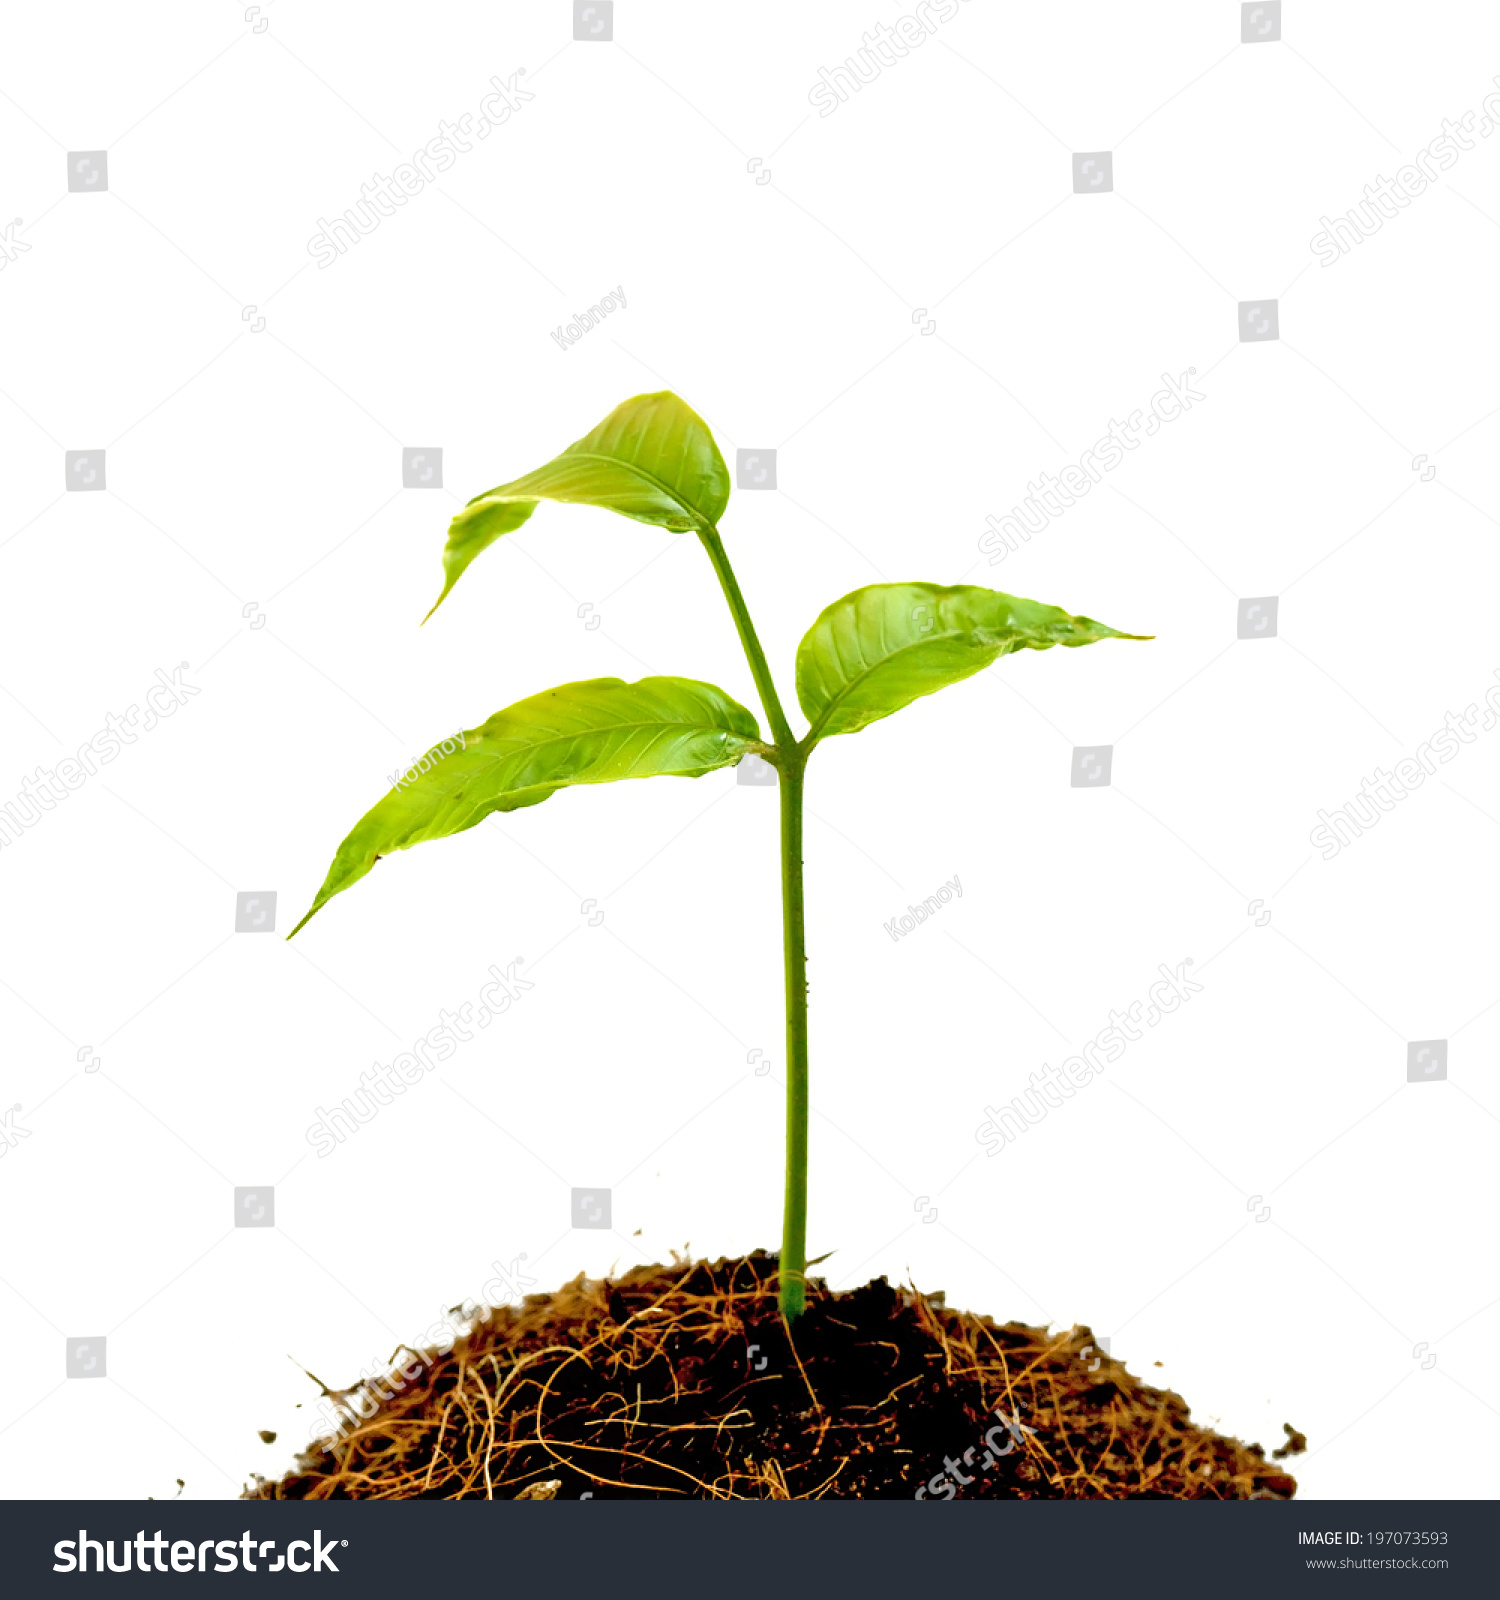 Young Green Plant On White Background Stock Photo 197073593 ...